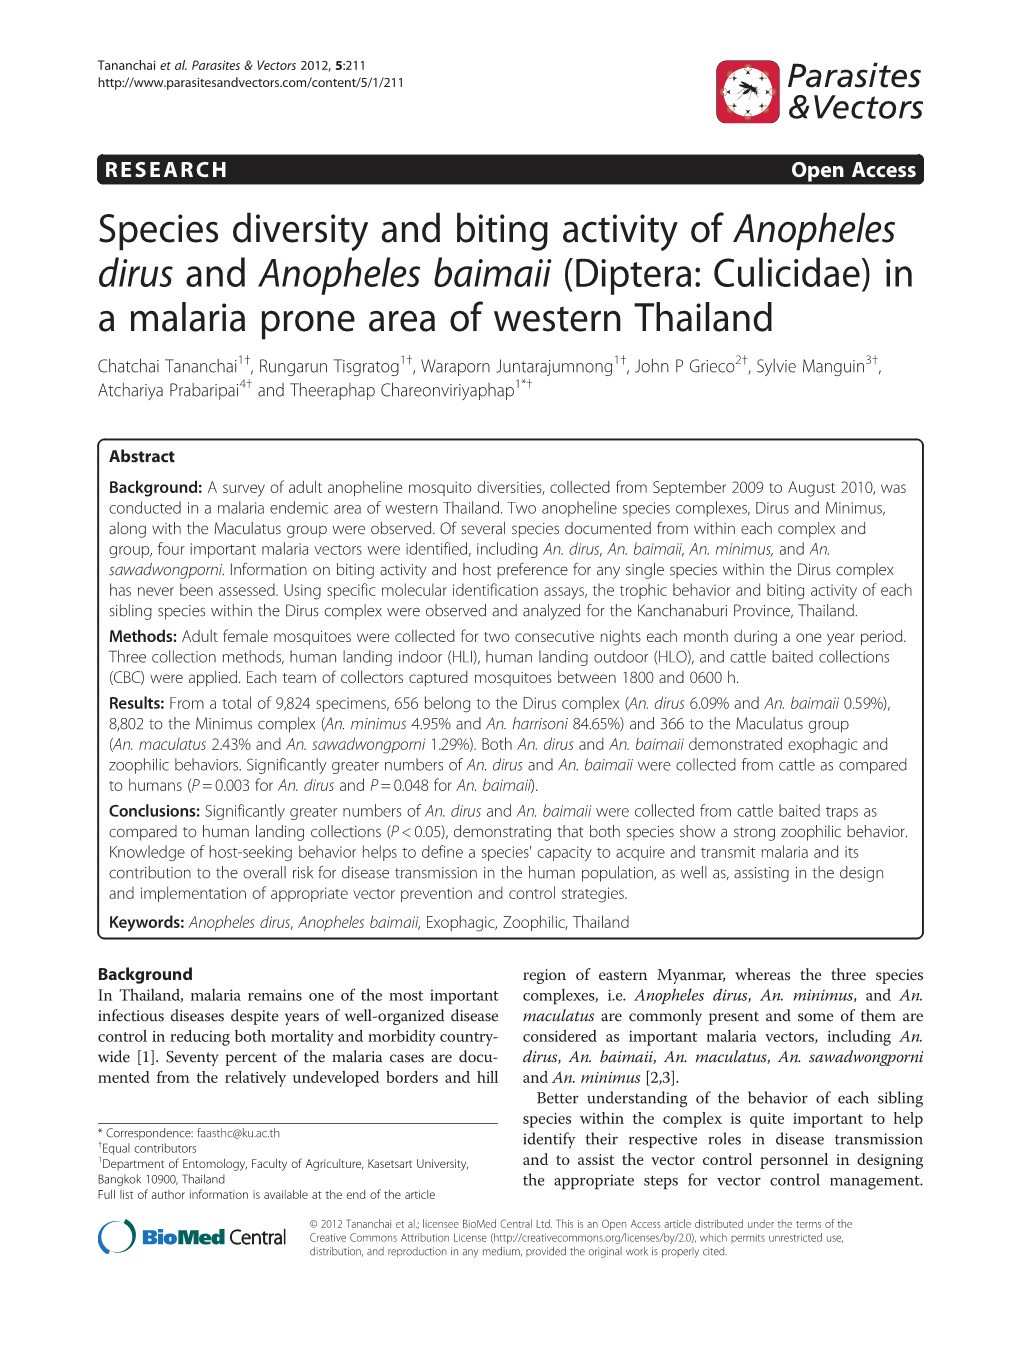 Species Diversity and Biting Activity of Anopheles Dirus and Anopheles